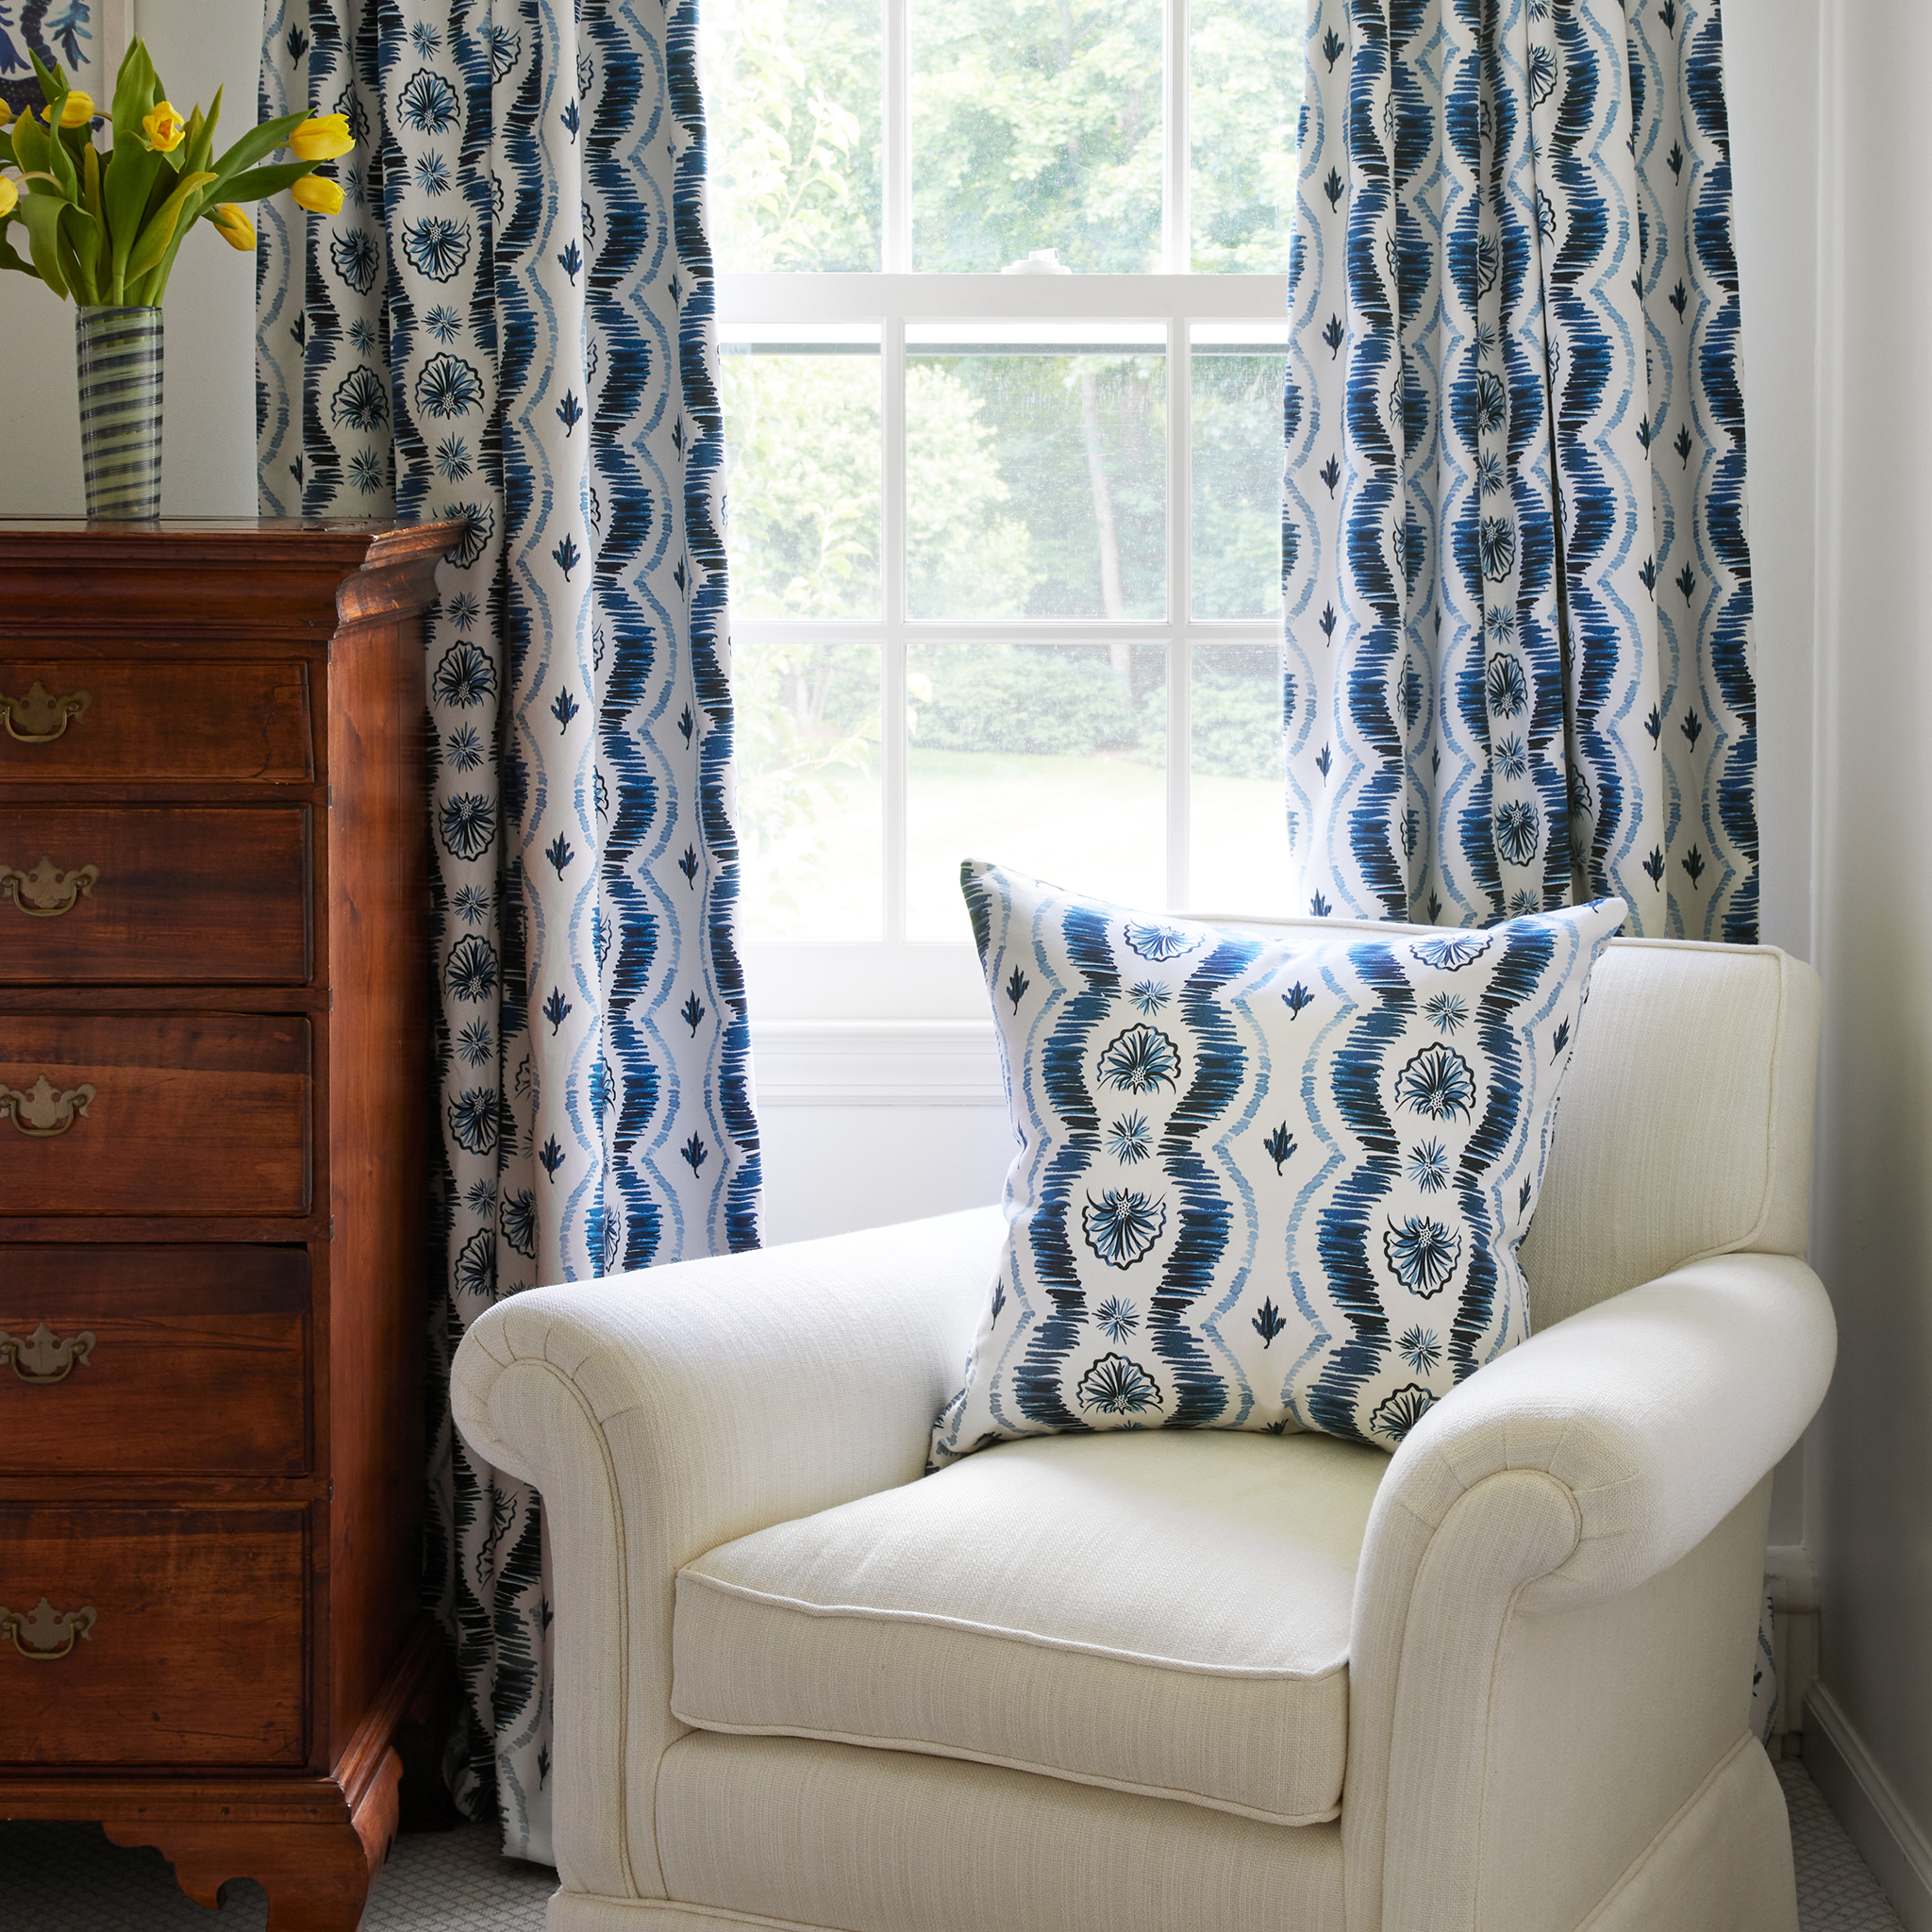 Blue ikat custom curtain hanging on a rod in front of a window next to a tall wooden chest and a white upholstered chair styled with a blue ikat custom pillow